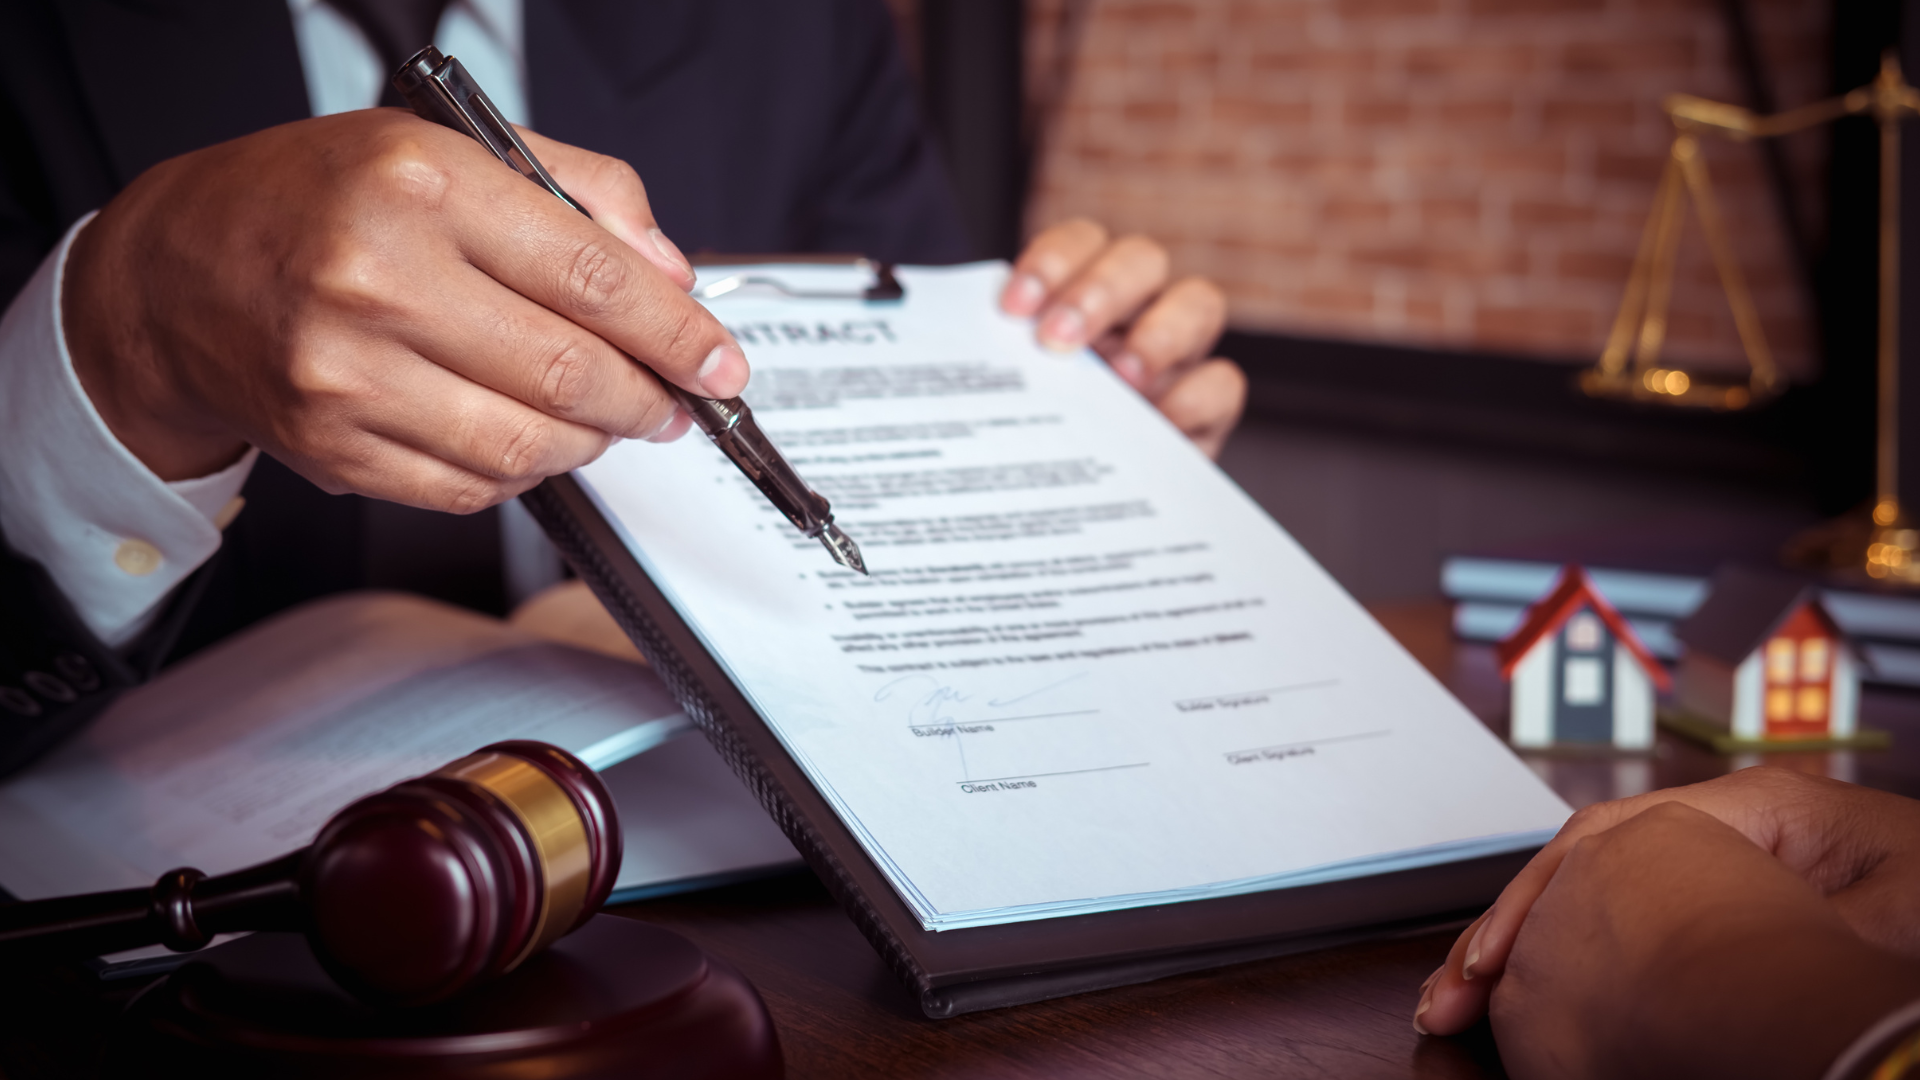 Lawyer holding a document and pointing with a pen. Discovery is the opportunity in litigation to learn facts and gather information from an opposing party or third parties.